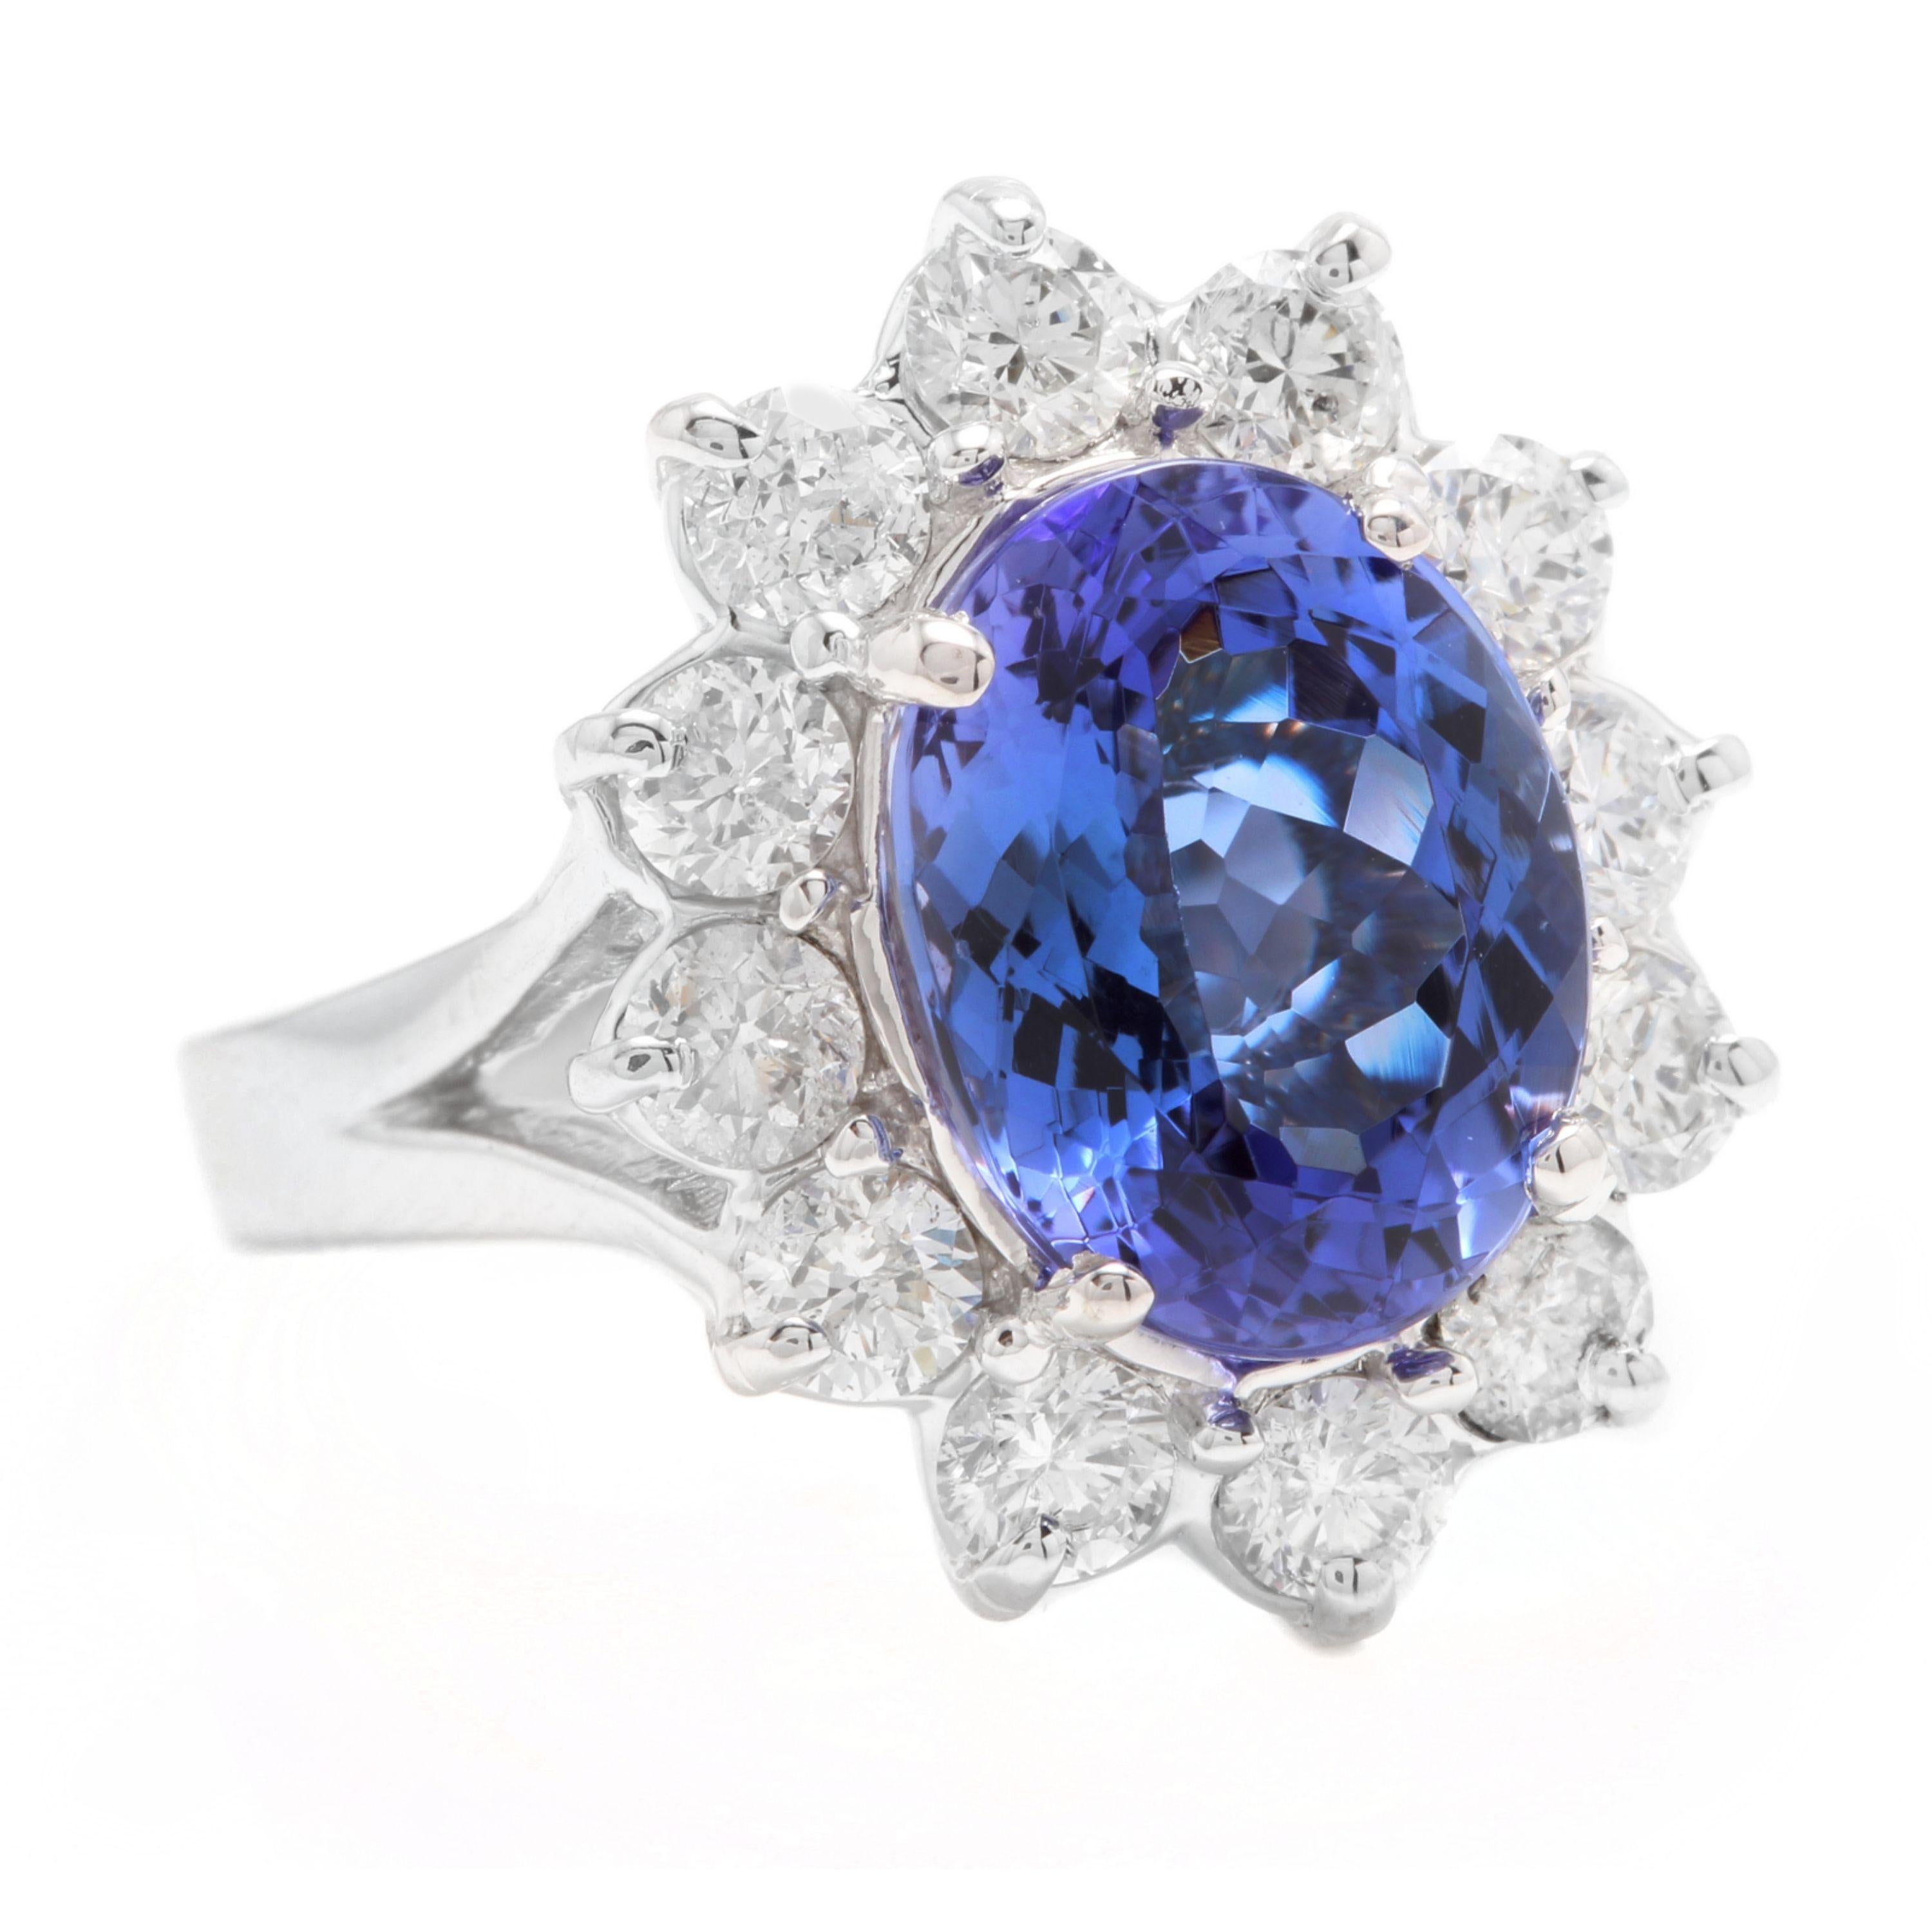 5.90 Carats Natural Very Nice Looking Tanzanite and Diamond 14K Solid White Gold Ring

Total Natural Oval Cut Tanzanite Weight is: 4.00 Carats

Natural Round Diamonds Weight: 1.90 Carats (color G-H / Clarity SI1-SI2)

Ring size: 5.5 (we offer free